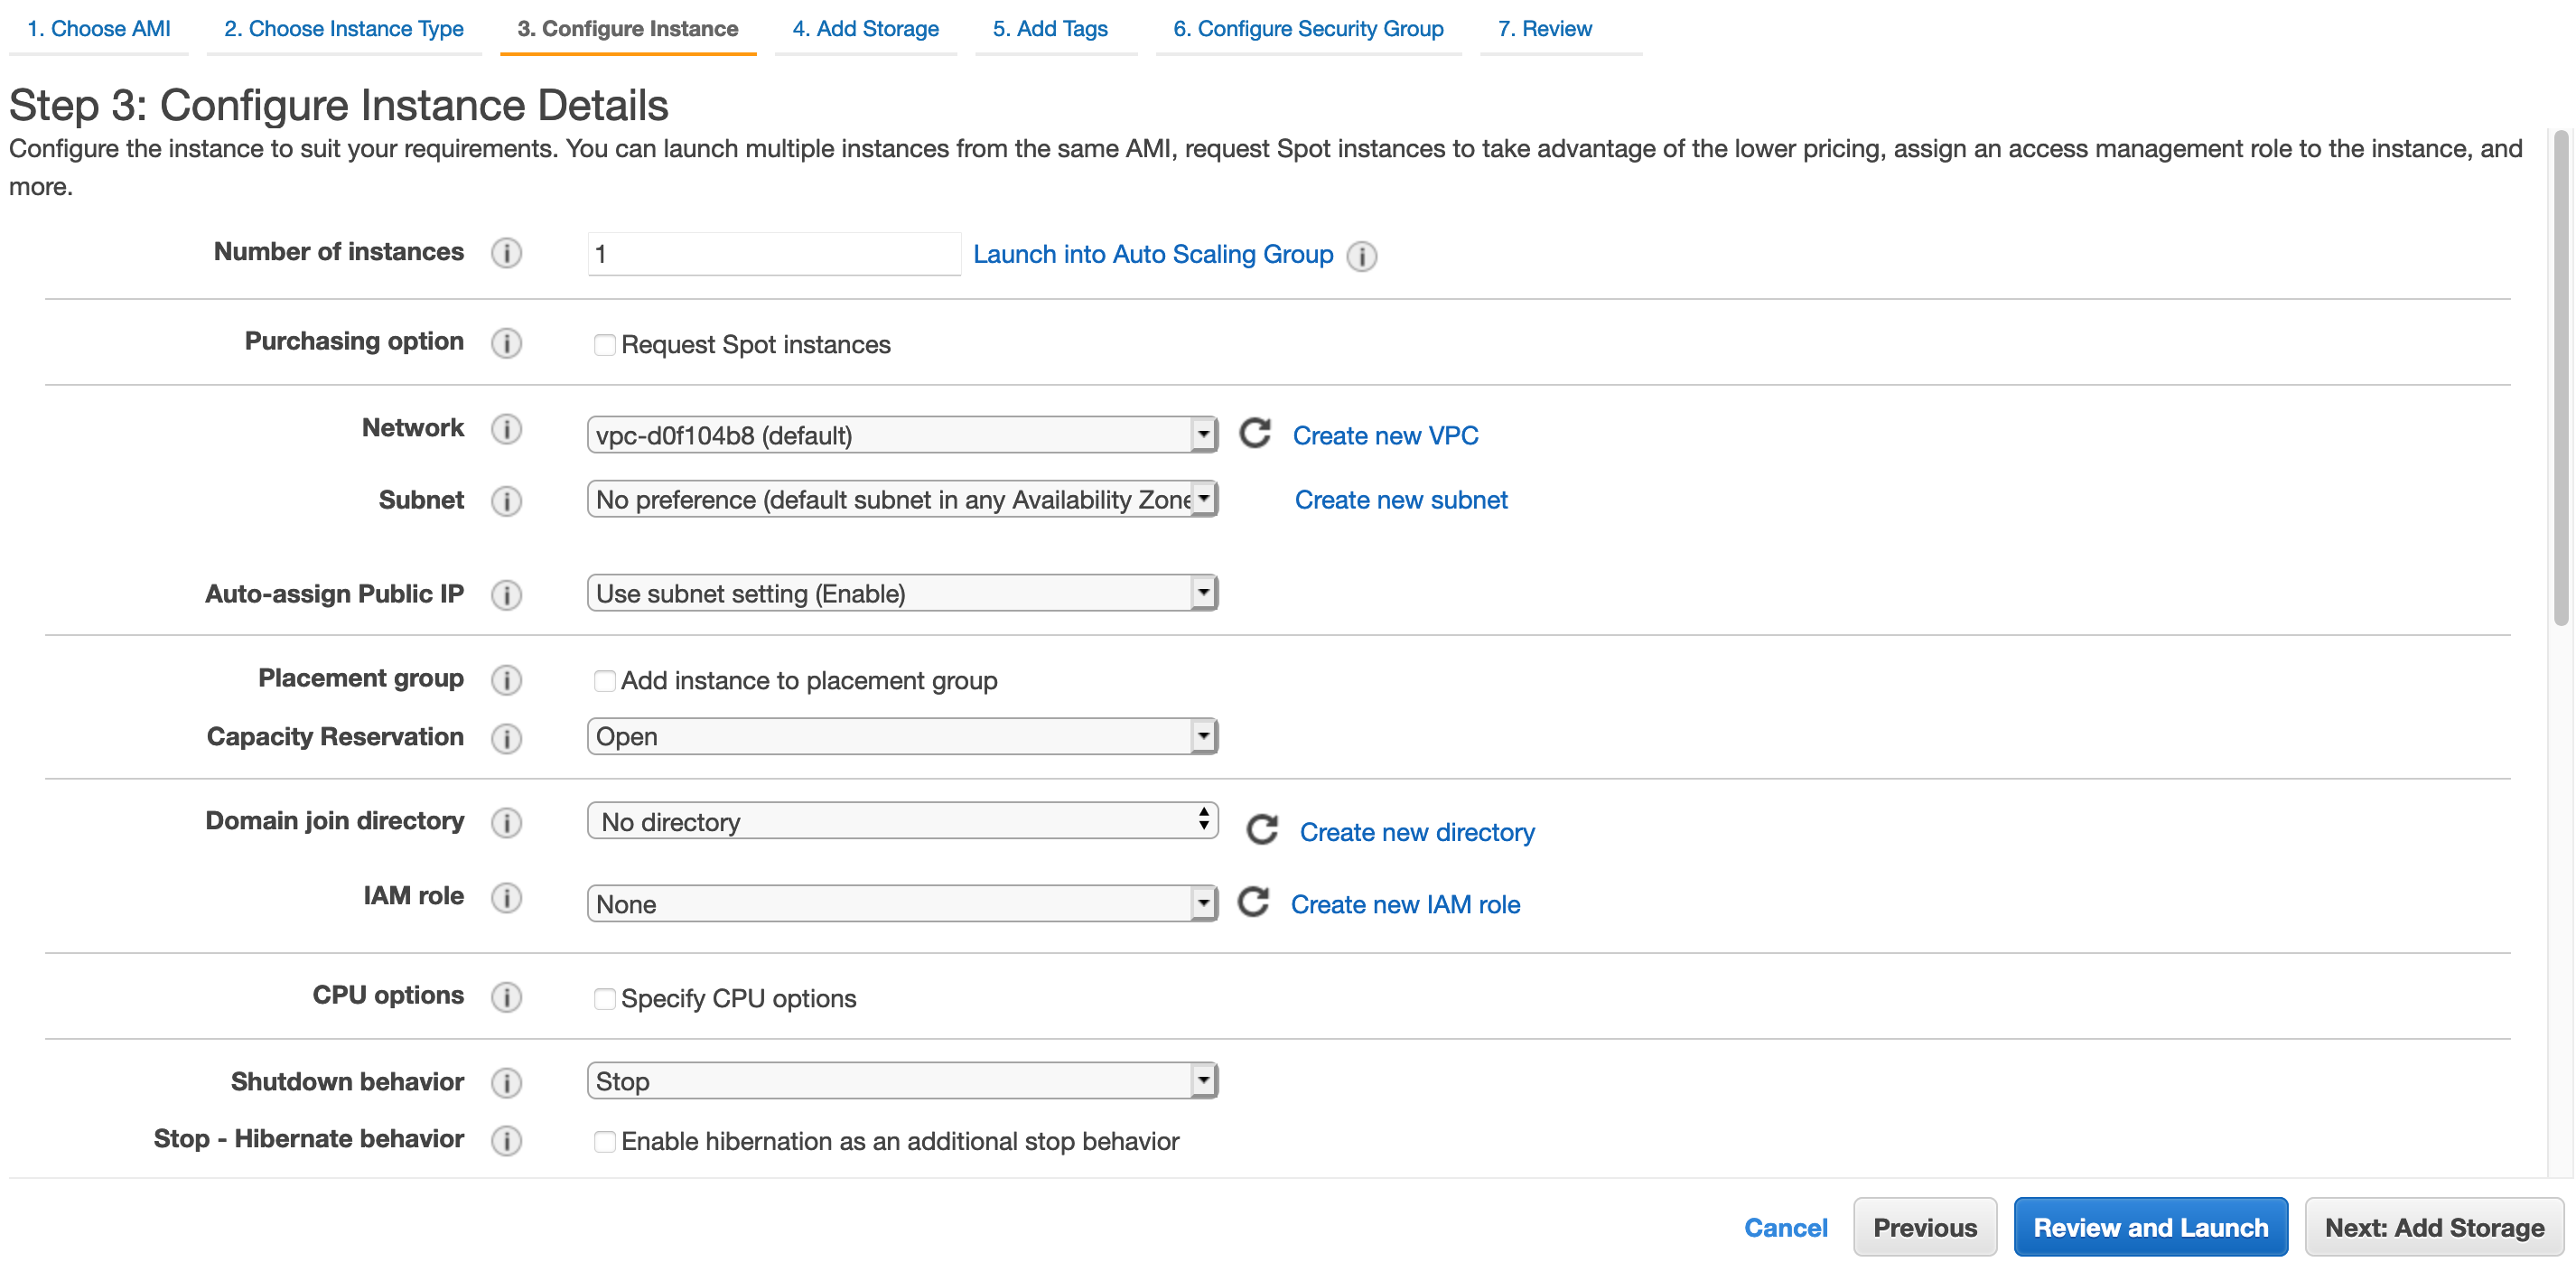 Page titled 'Step 3: Configure Instance Details'. Important: You can launch multiple instances from the same AMI, request Spot instances to take advantage of lower pricing, and assign access management role to the instance.